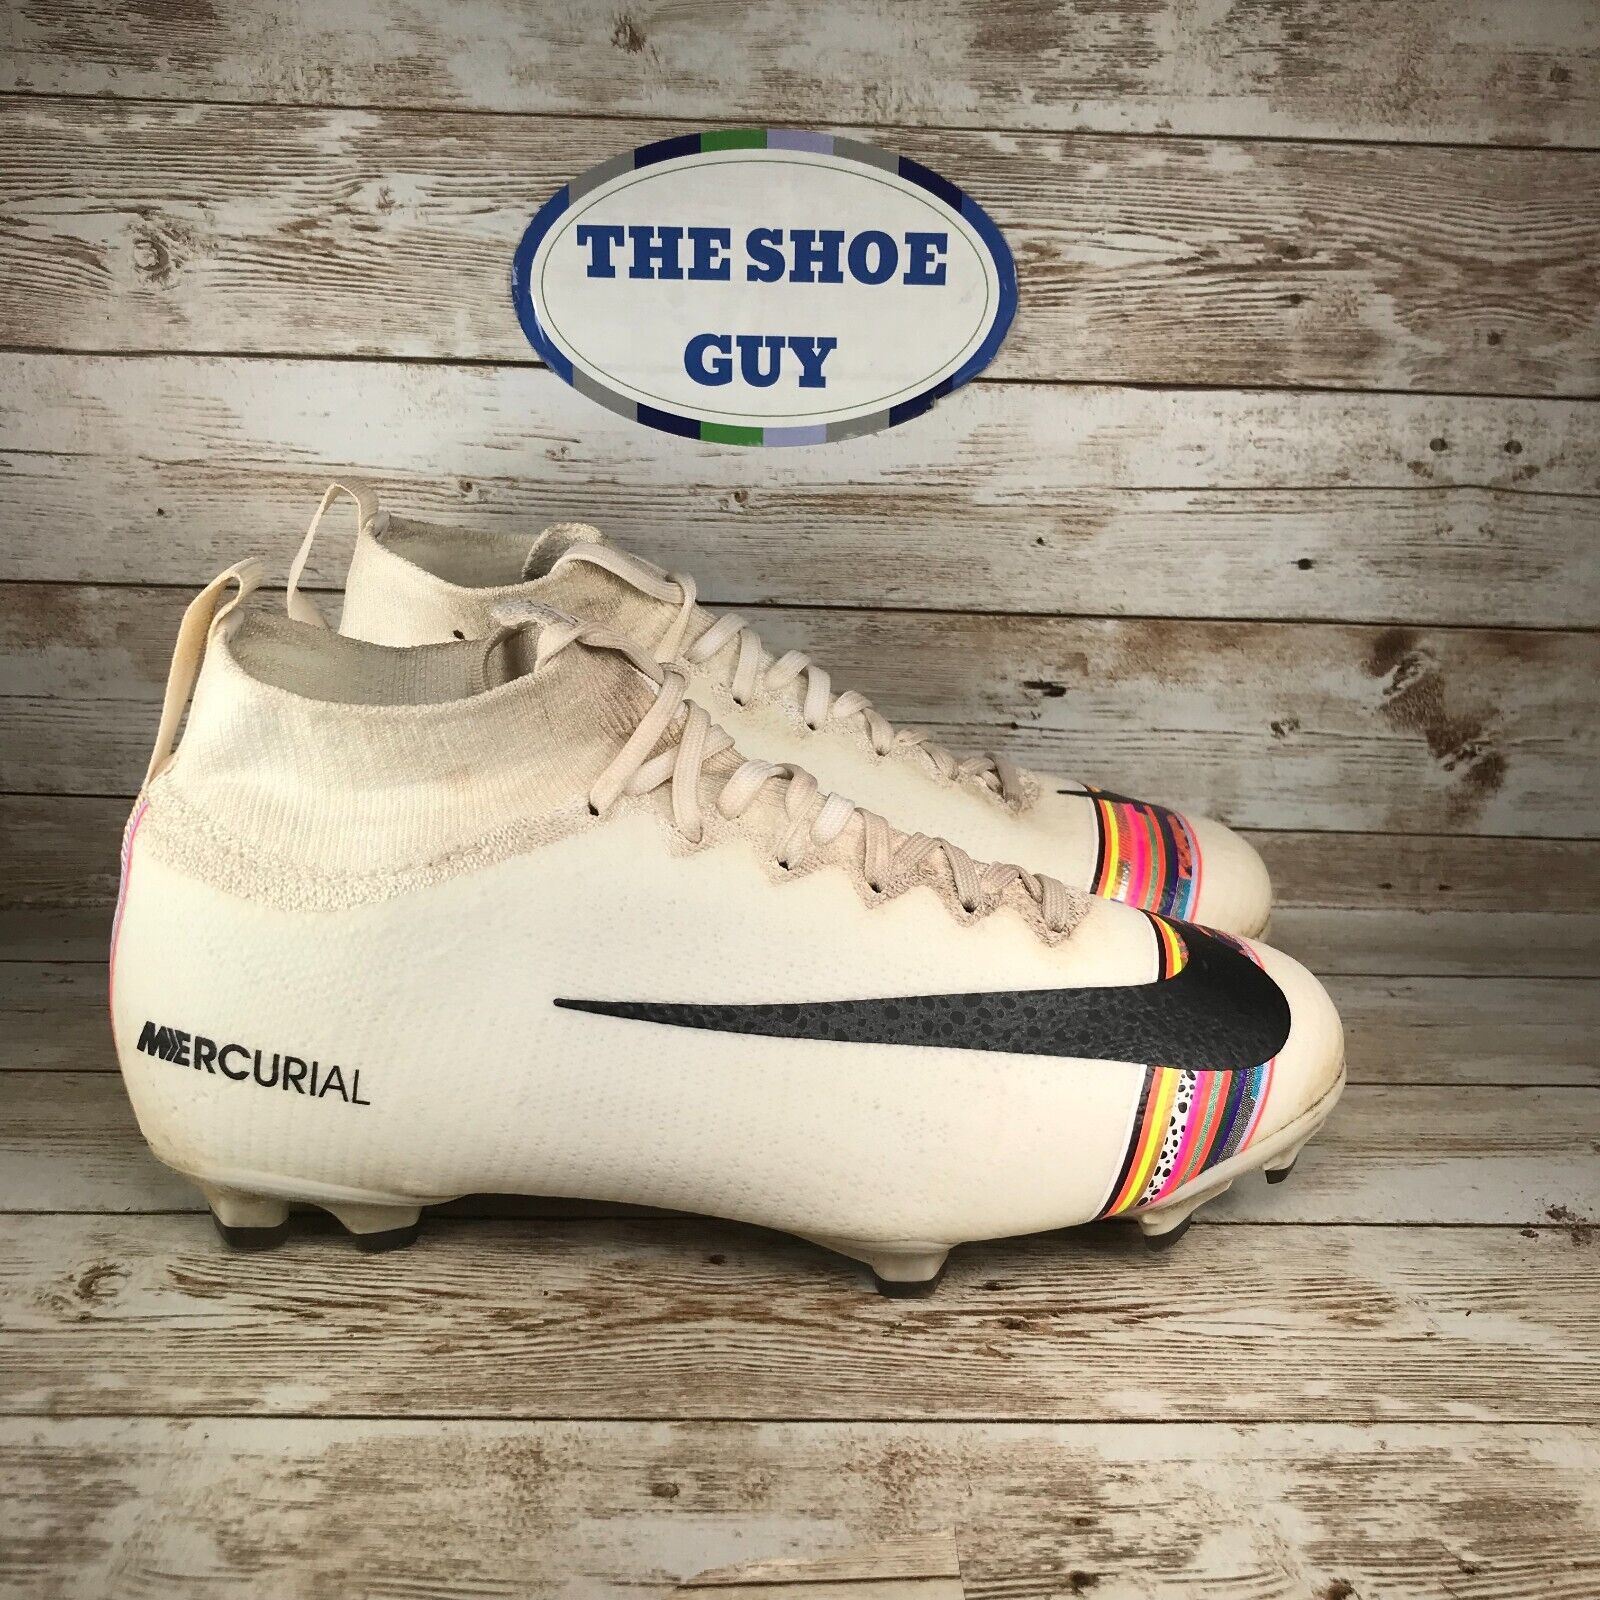 Kreta justering jøde Nike Mercurial Youth size 4.5Y Athletic low top White Soccer Cleats shoes |  eBay